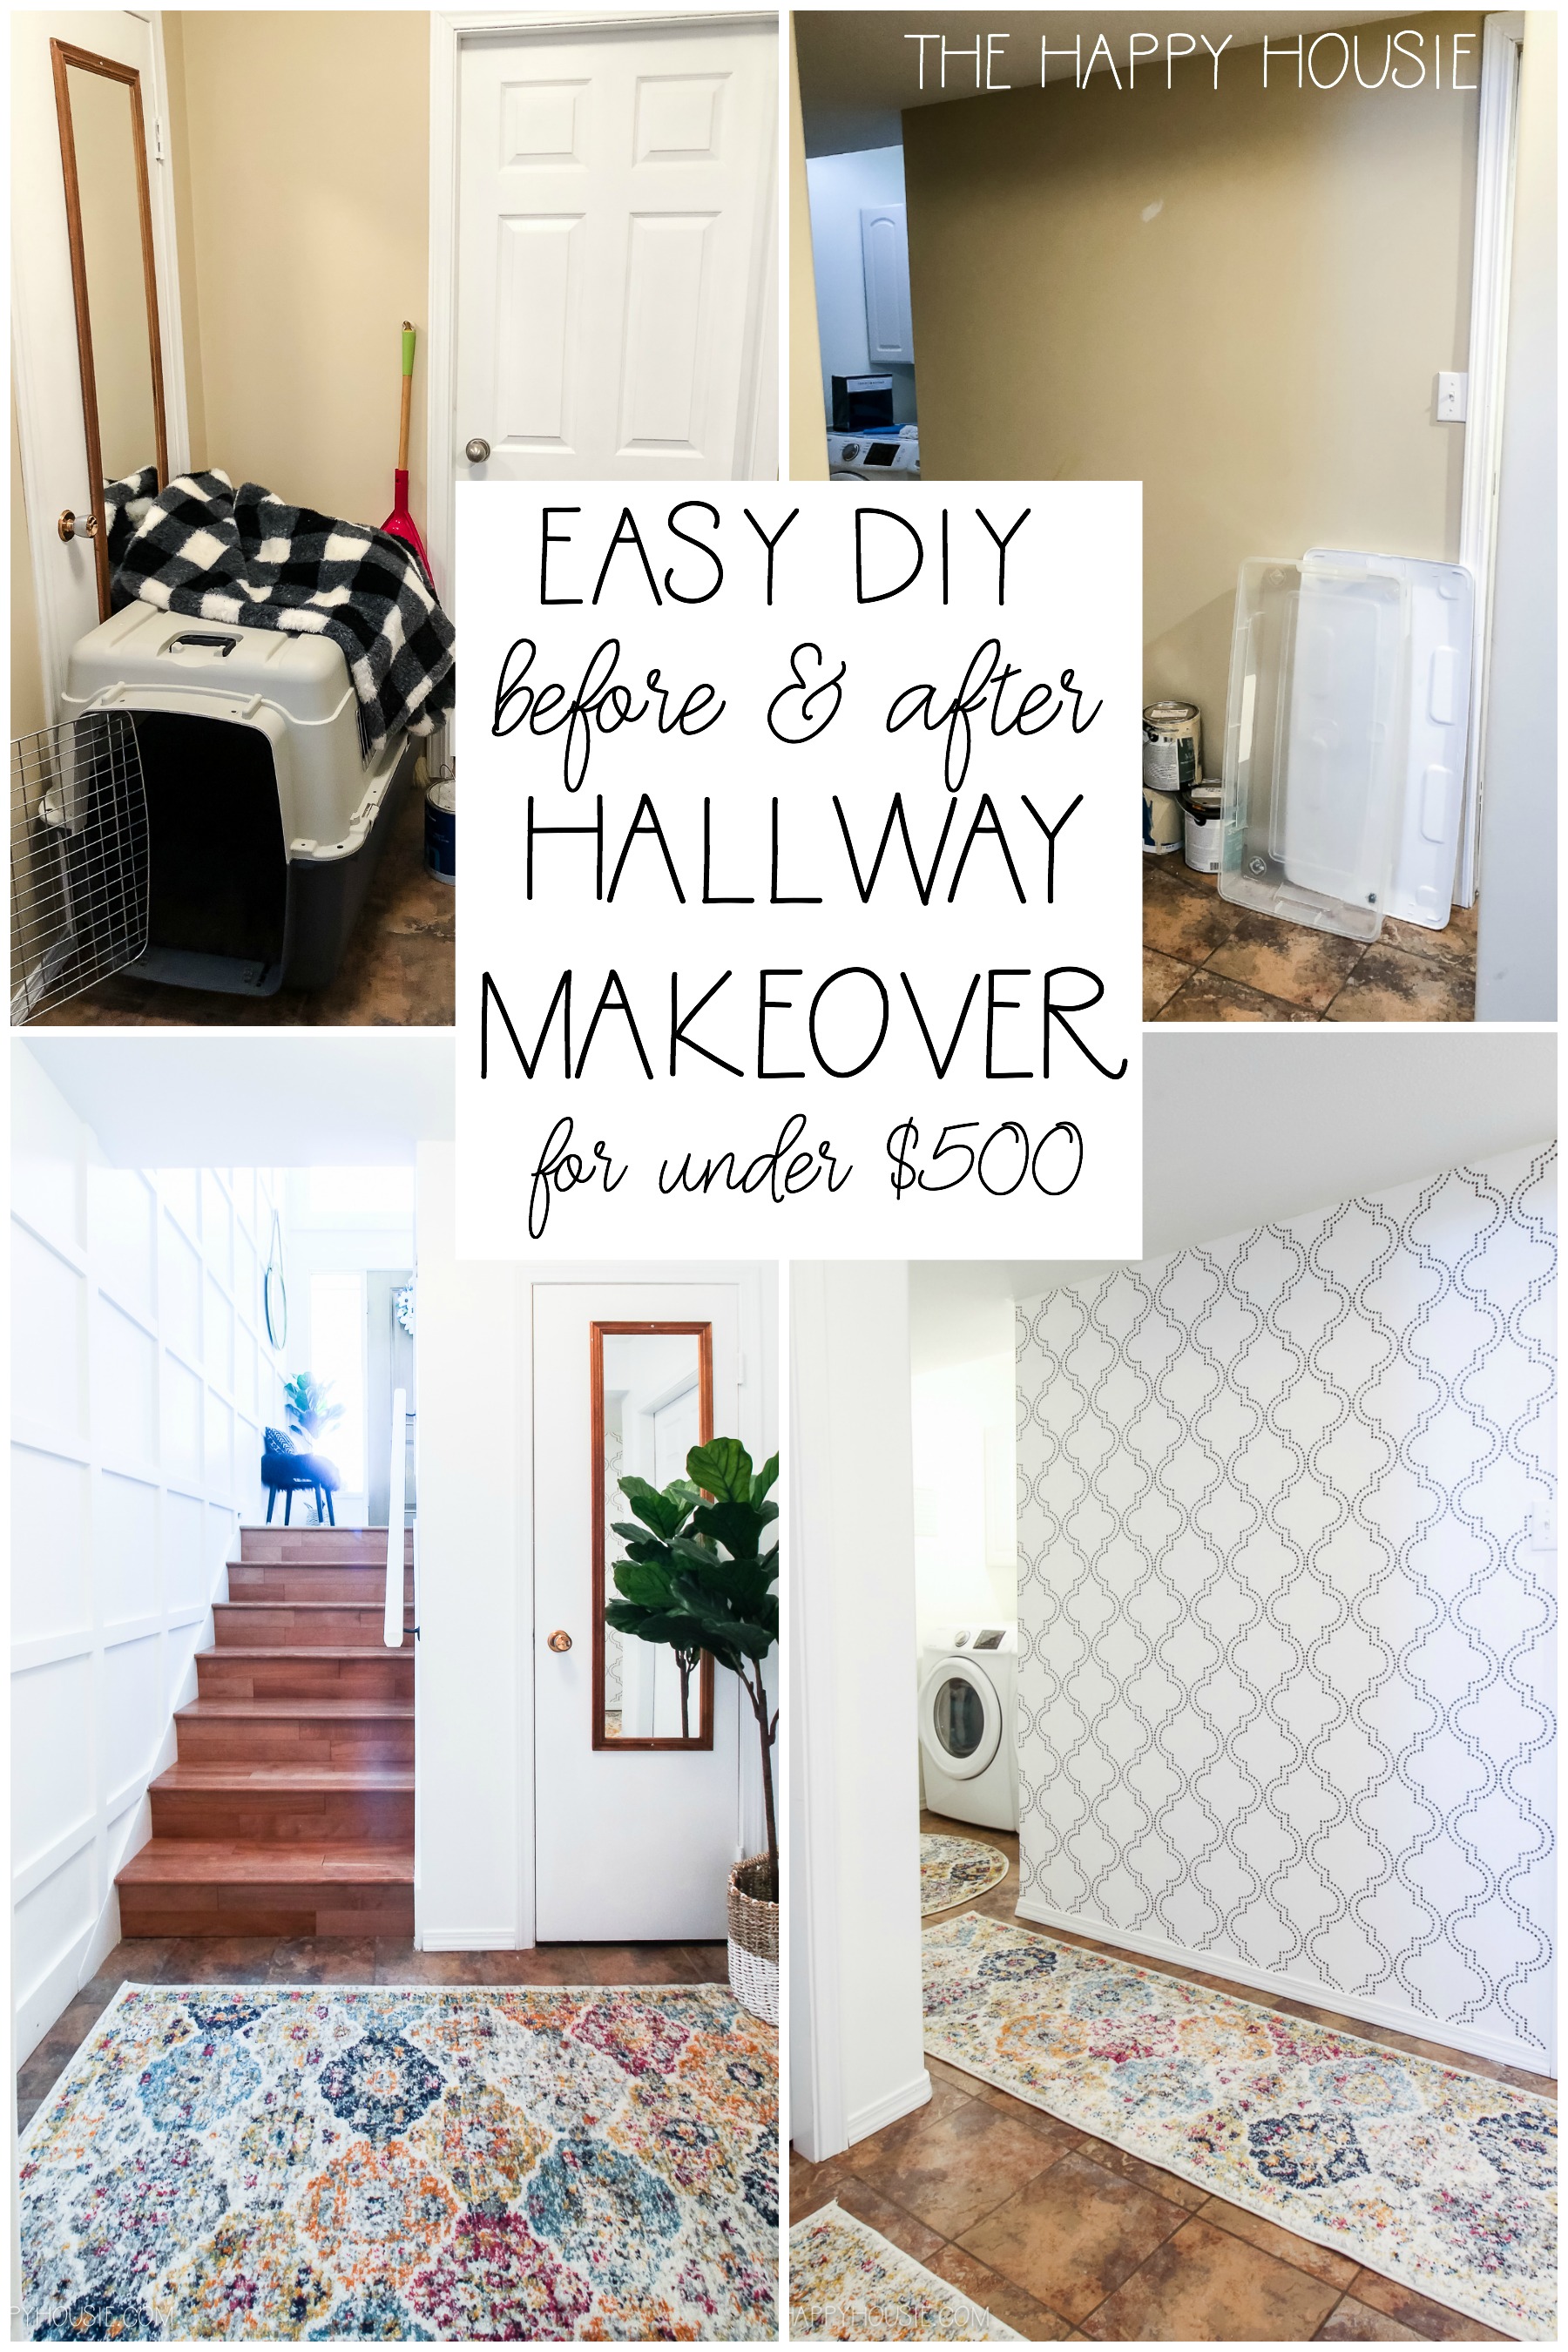 a hallway refresh on a budget featuring black and white wallpaper and cheery rugs and runners to cover old tile floors